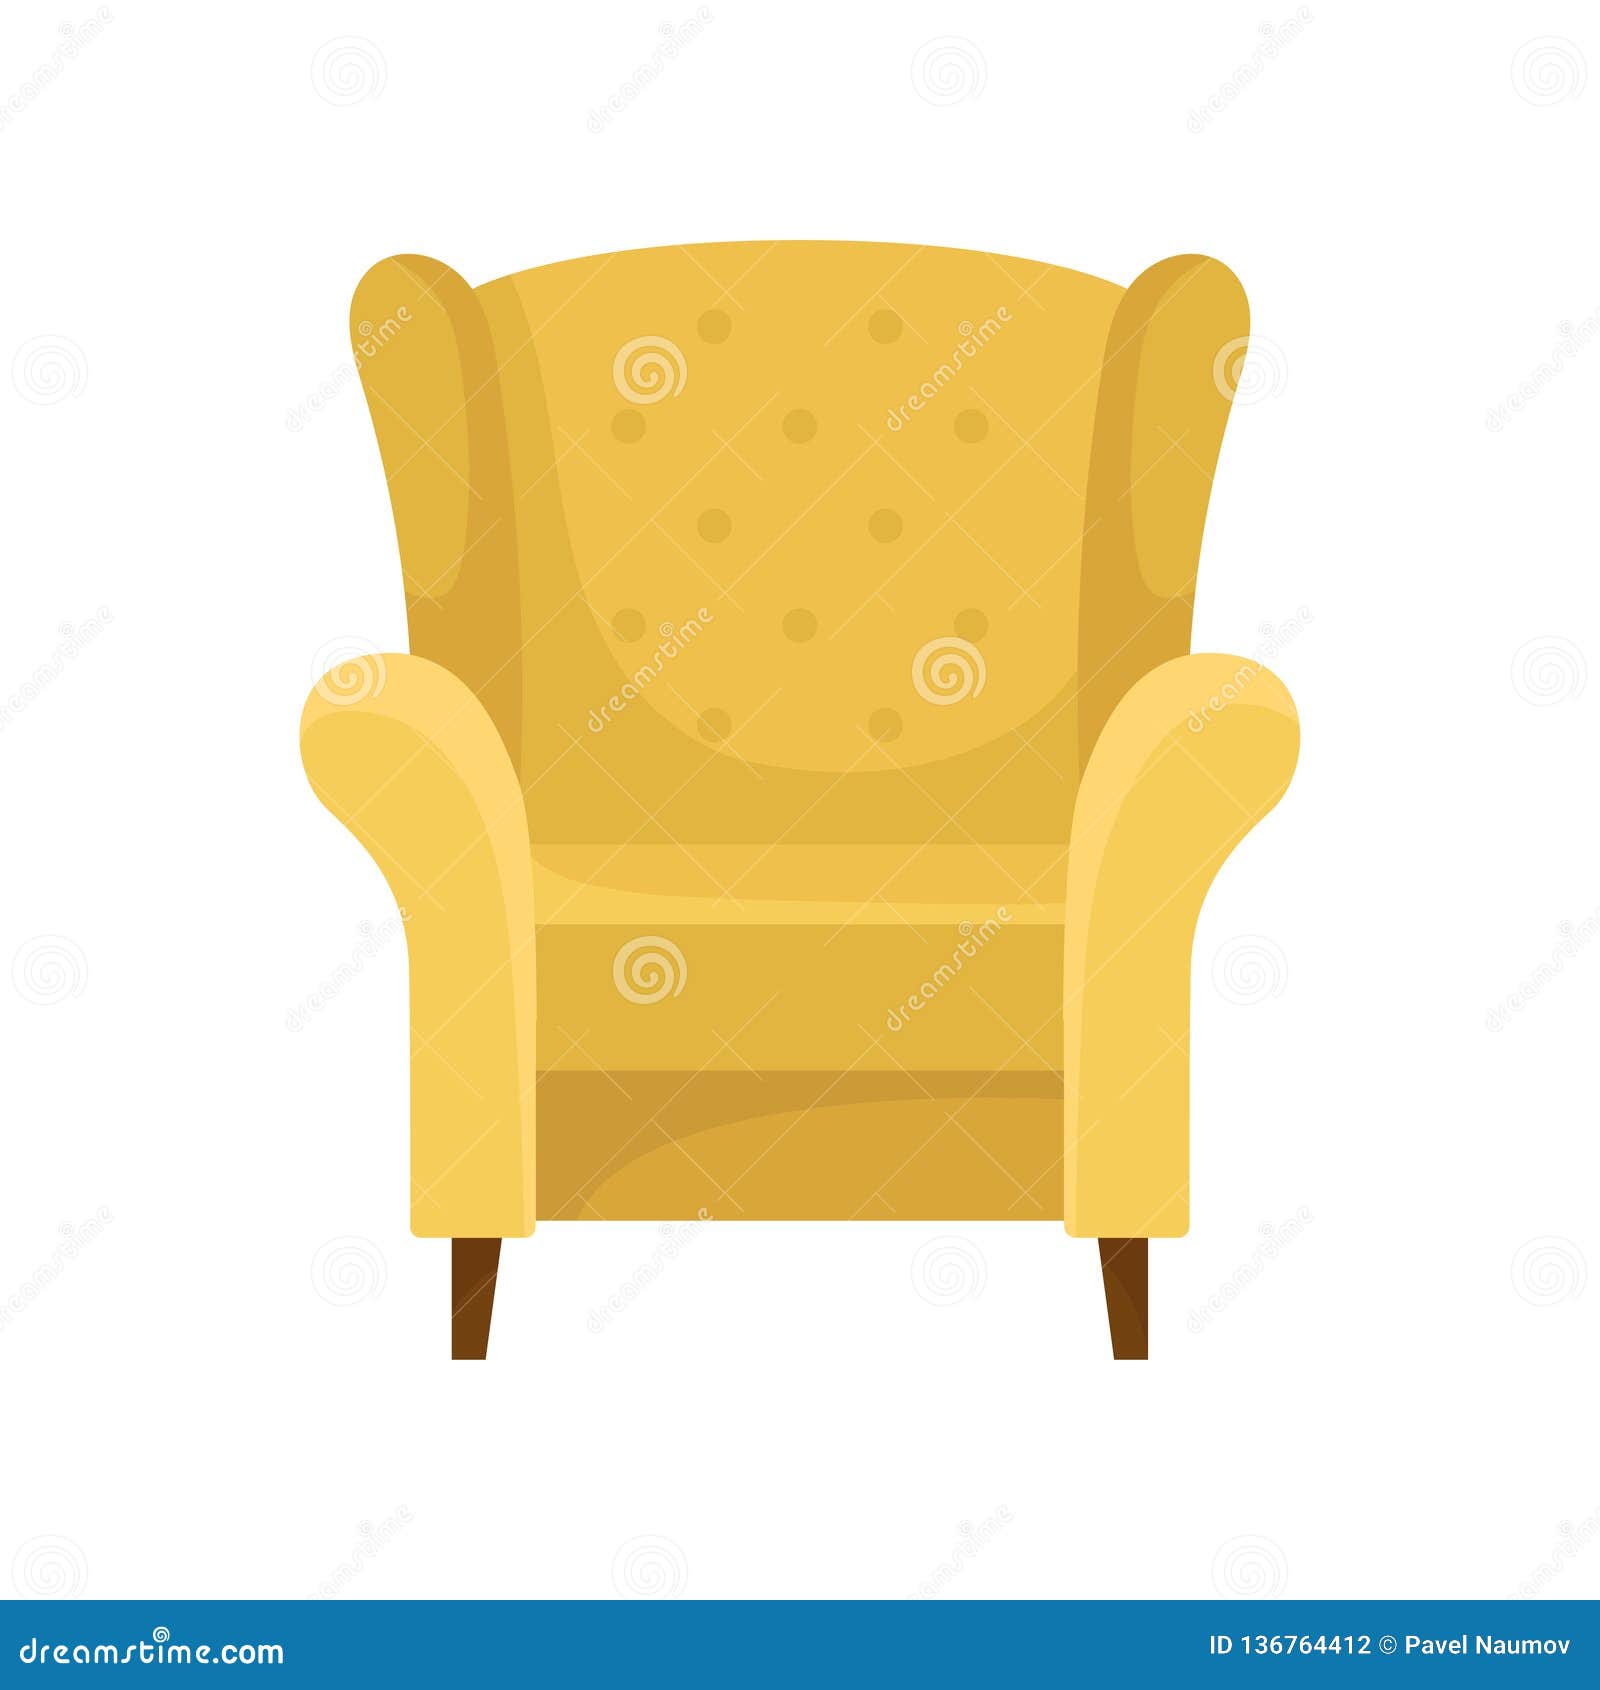 Comfortable Yellow Armchair With Wooden Legs. Cozy ...